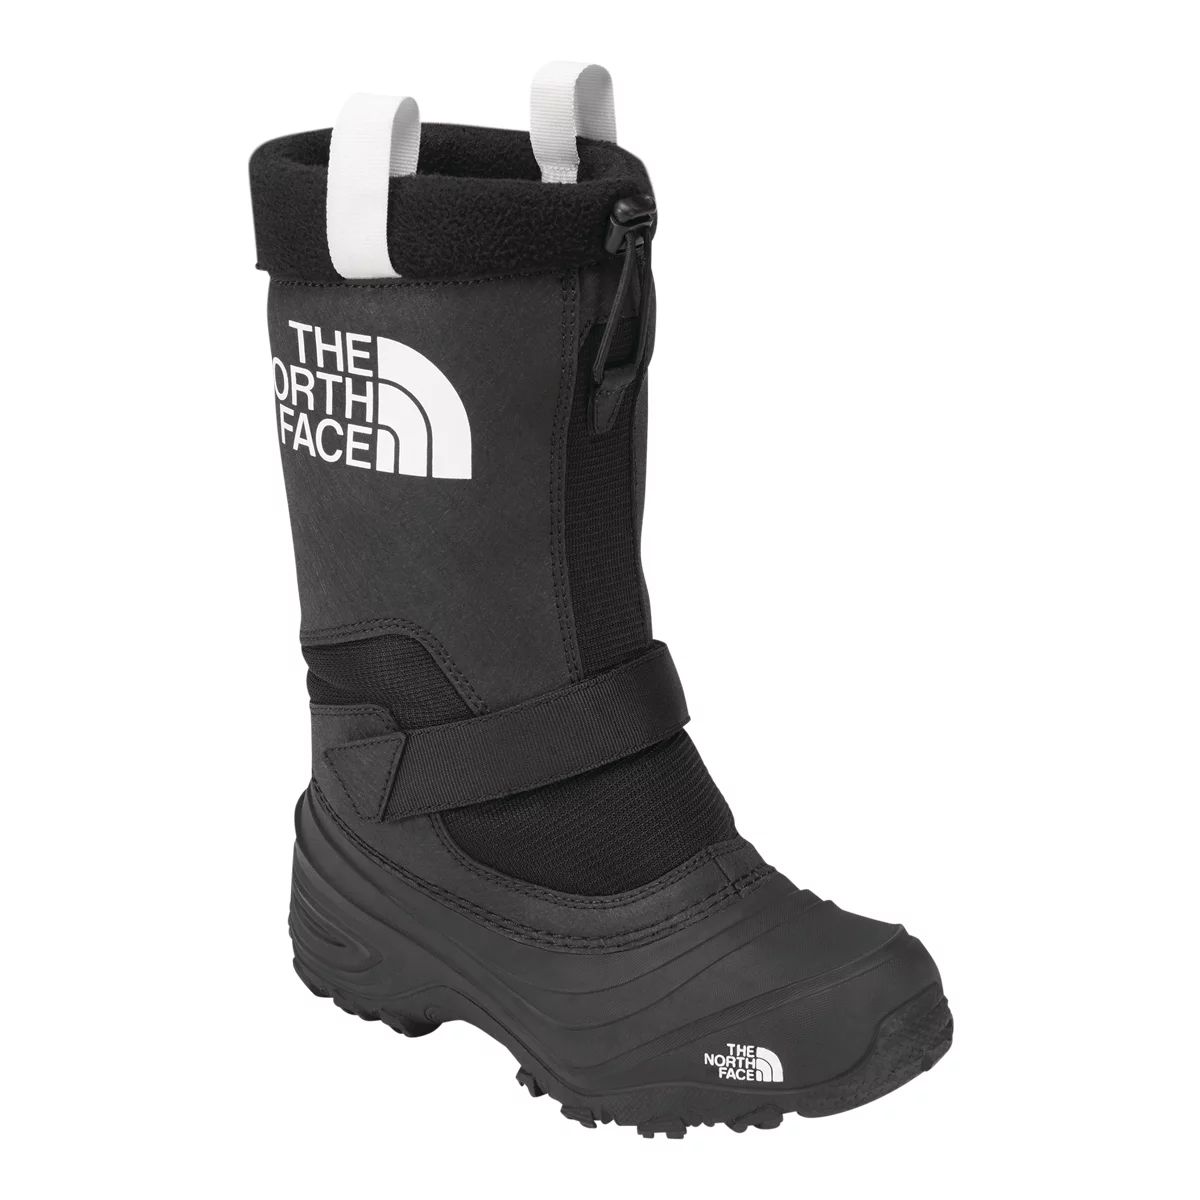 Image of The North Face Kids' Alpenglow Extreme III Waterproof Insulated Lightweight Winter Boots